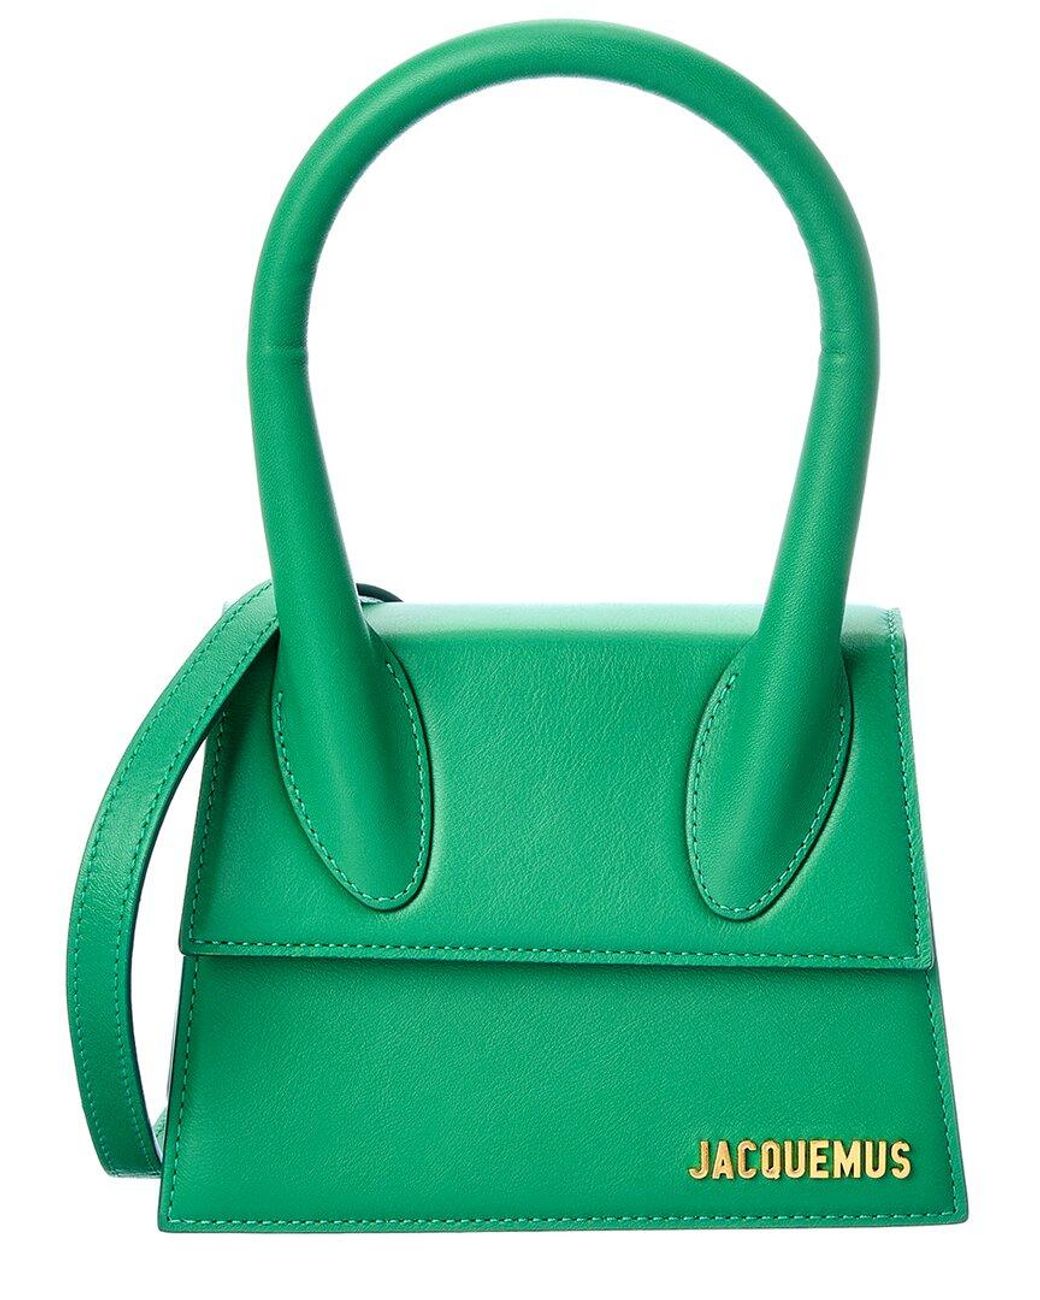 Jacquemus Le Chiquito Mini Leather Clutch in Green | Lyst